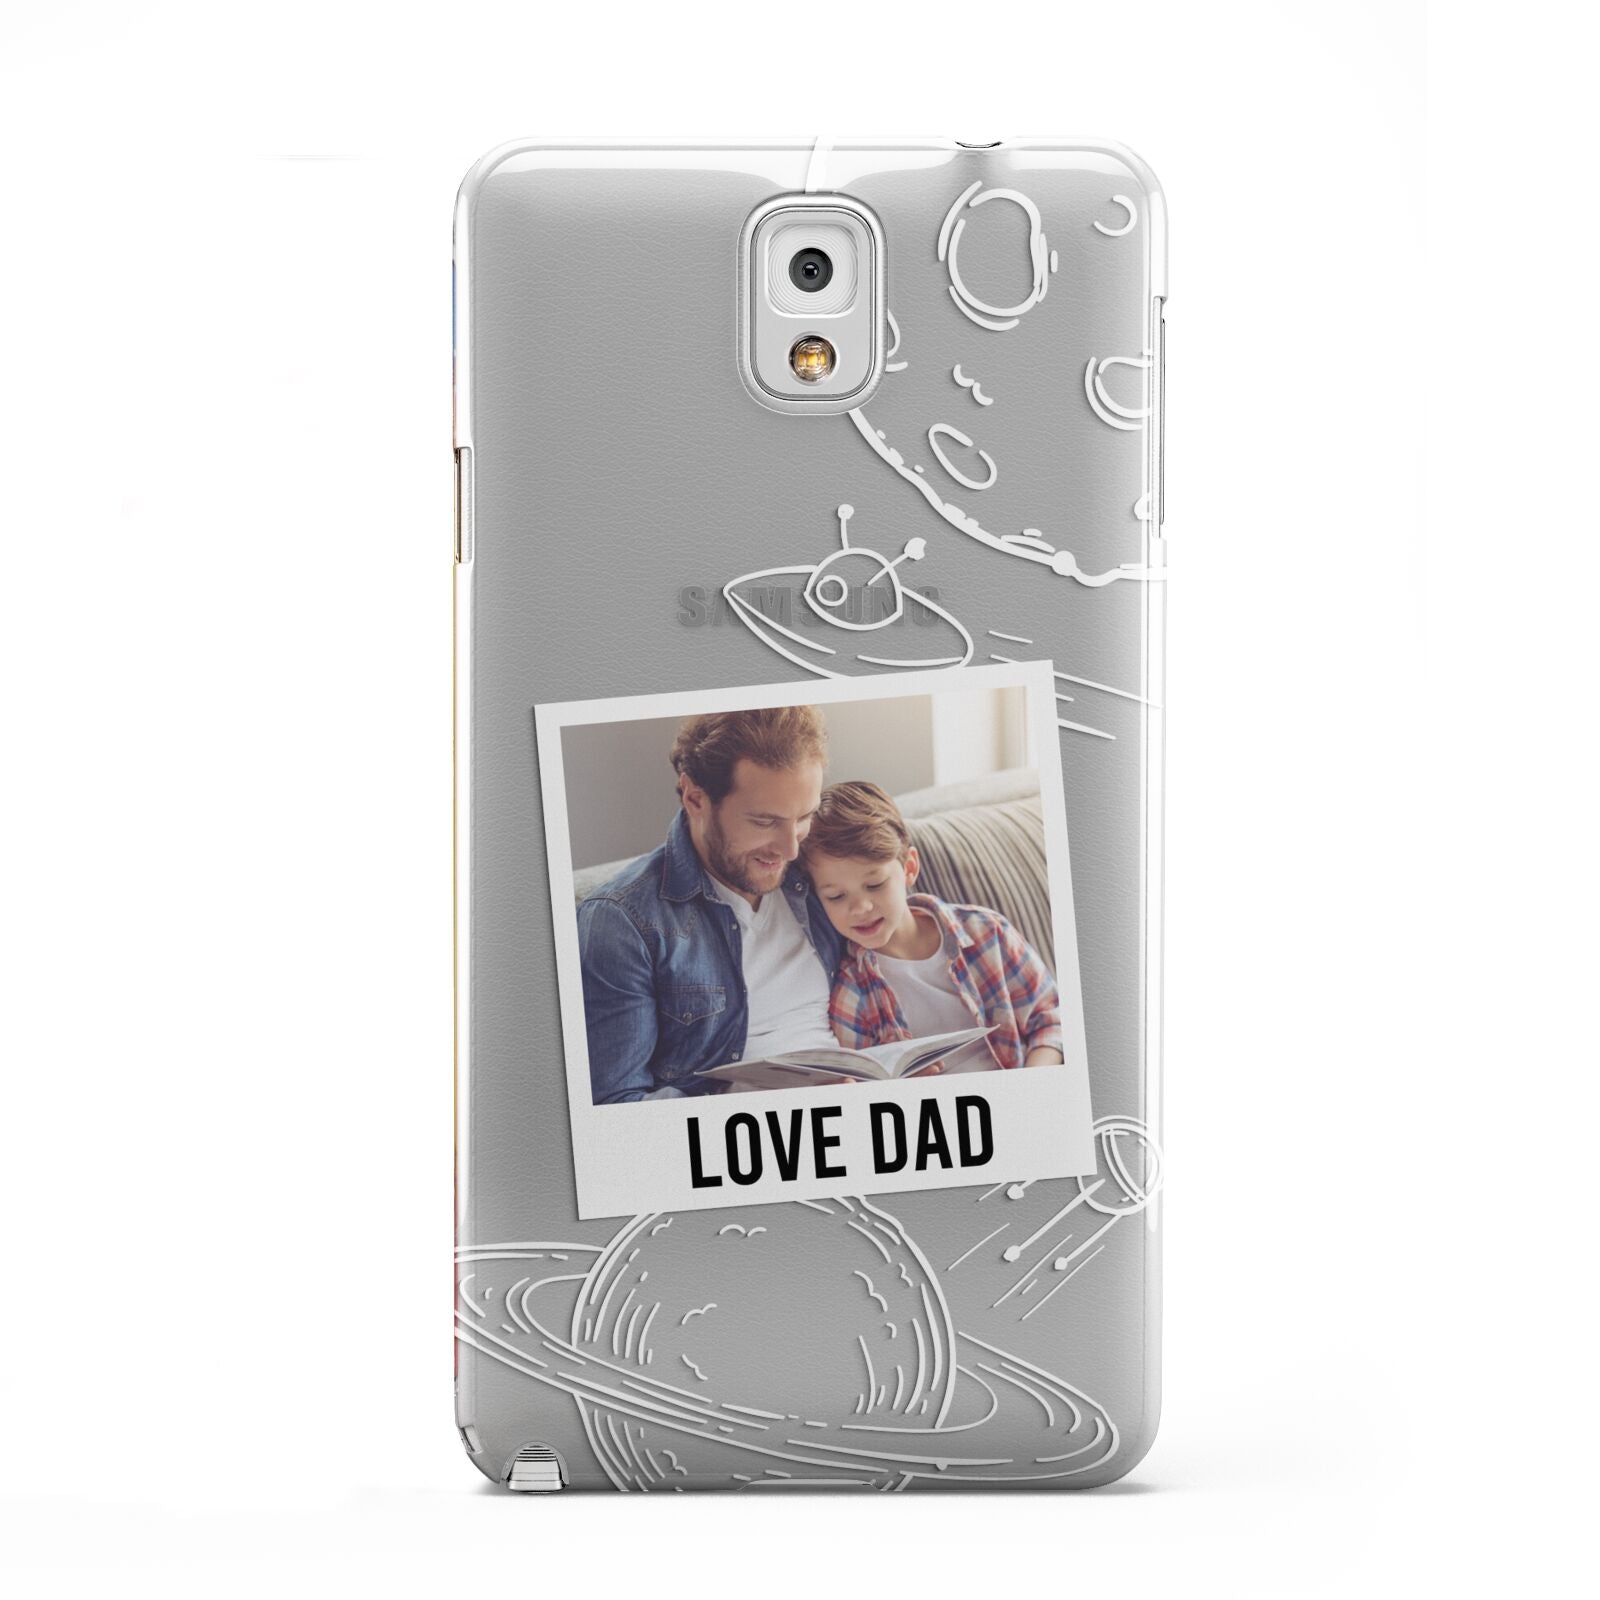 Personalised From Dad Photo Samsung Galaxy Note 3 Case